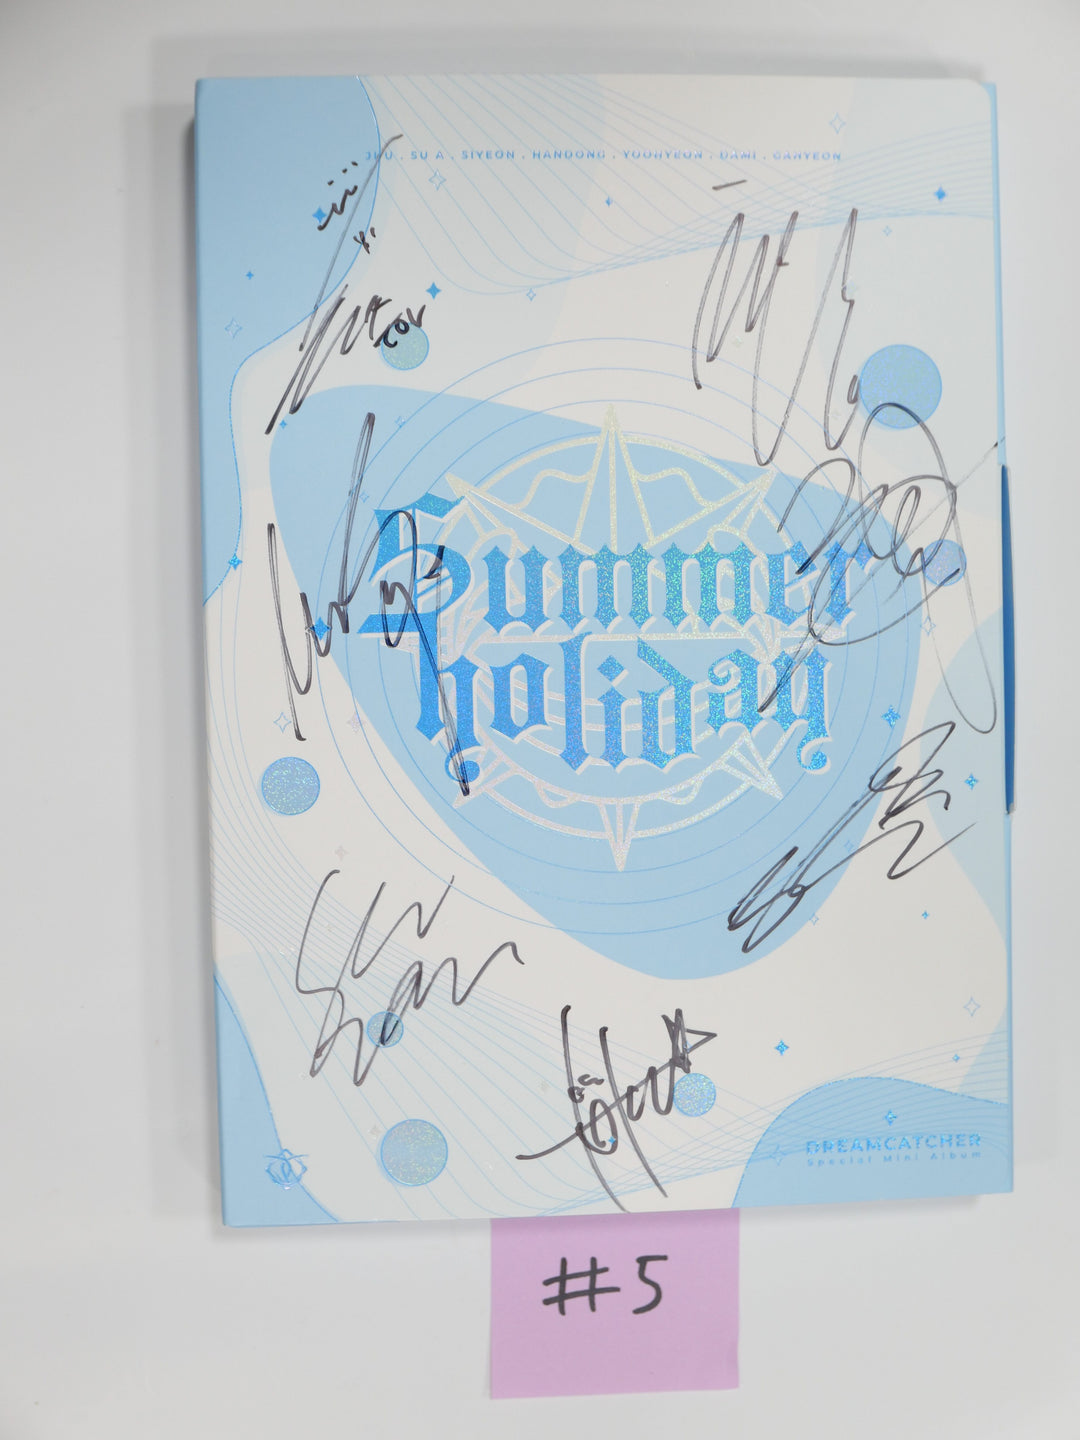 Dreamcatcher "Summer Holiday" 2nd Special Mini – Hand Autographed(Singed) Promo Album